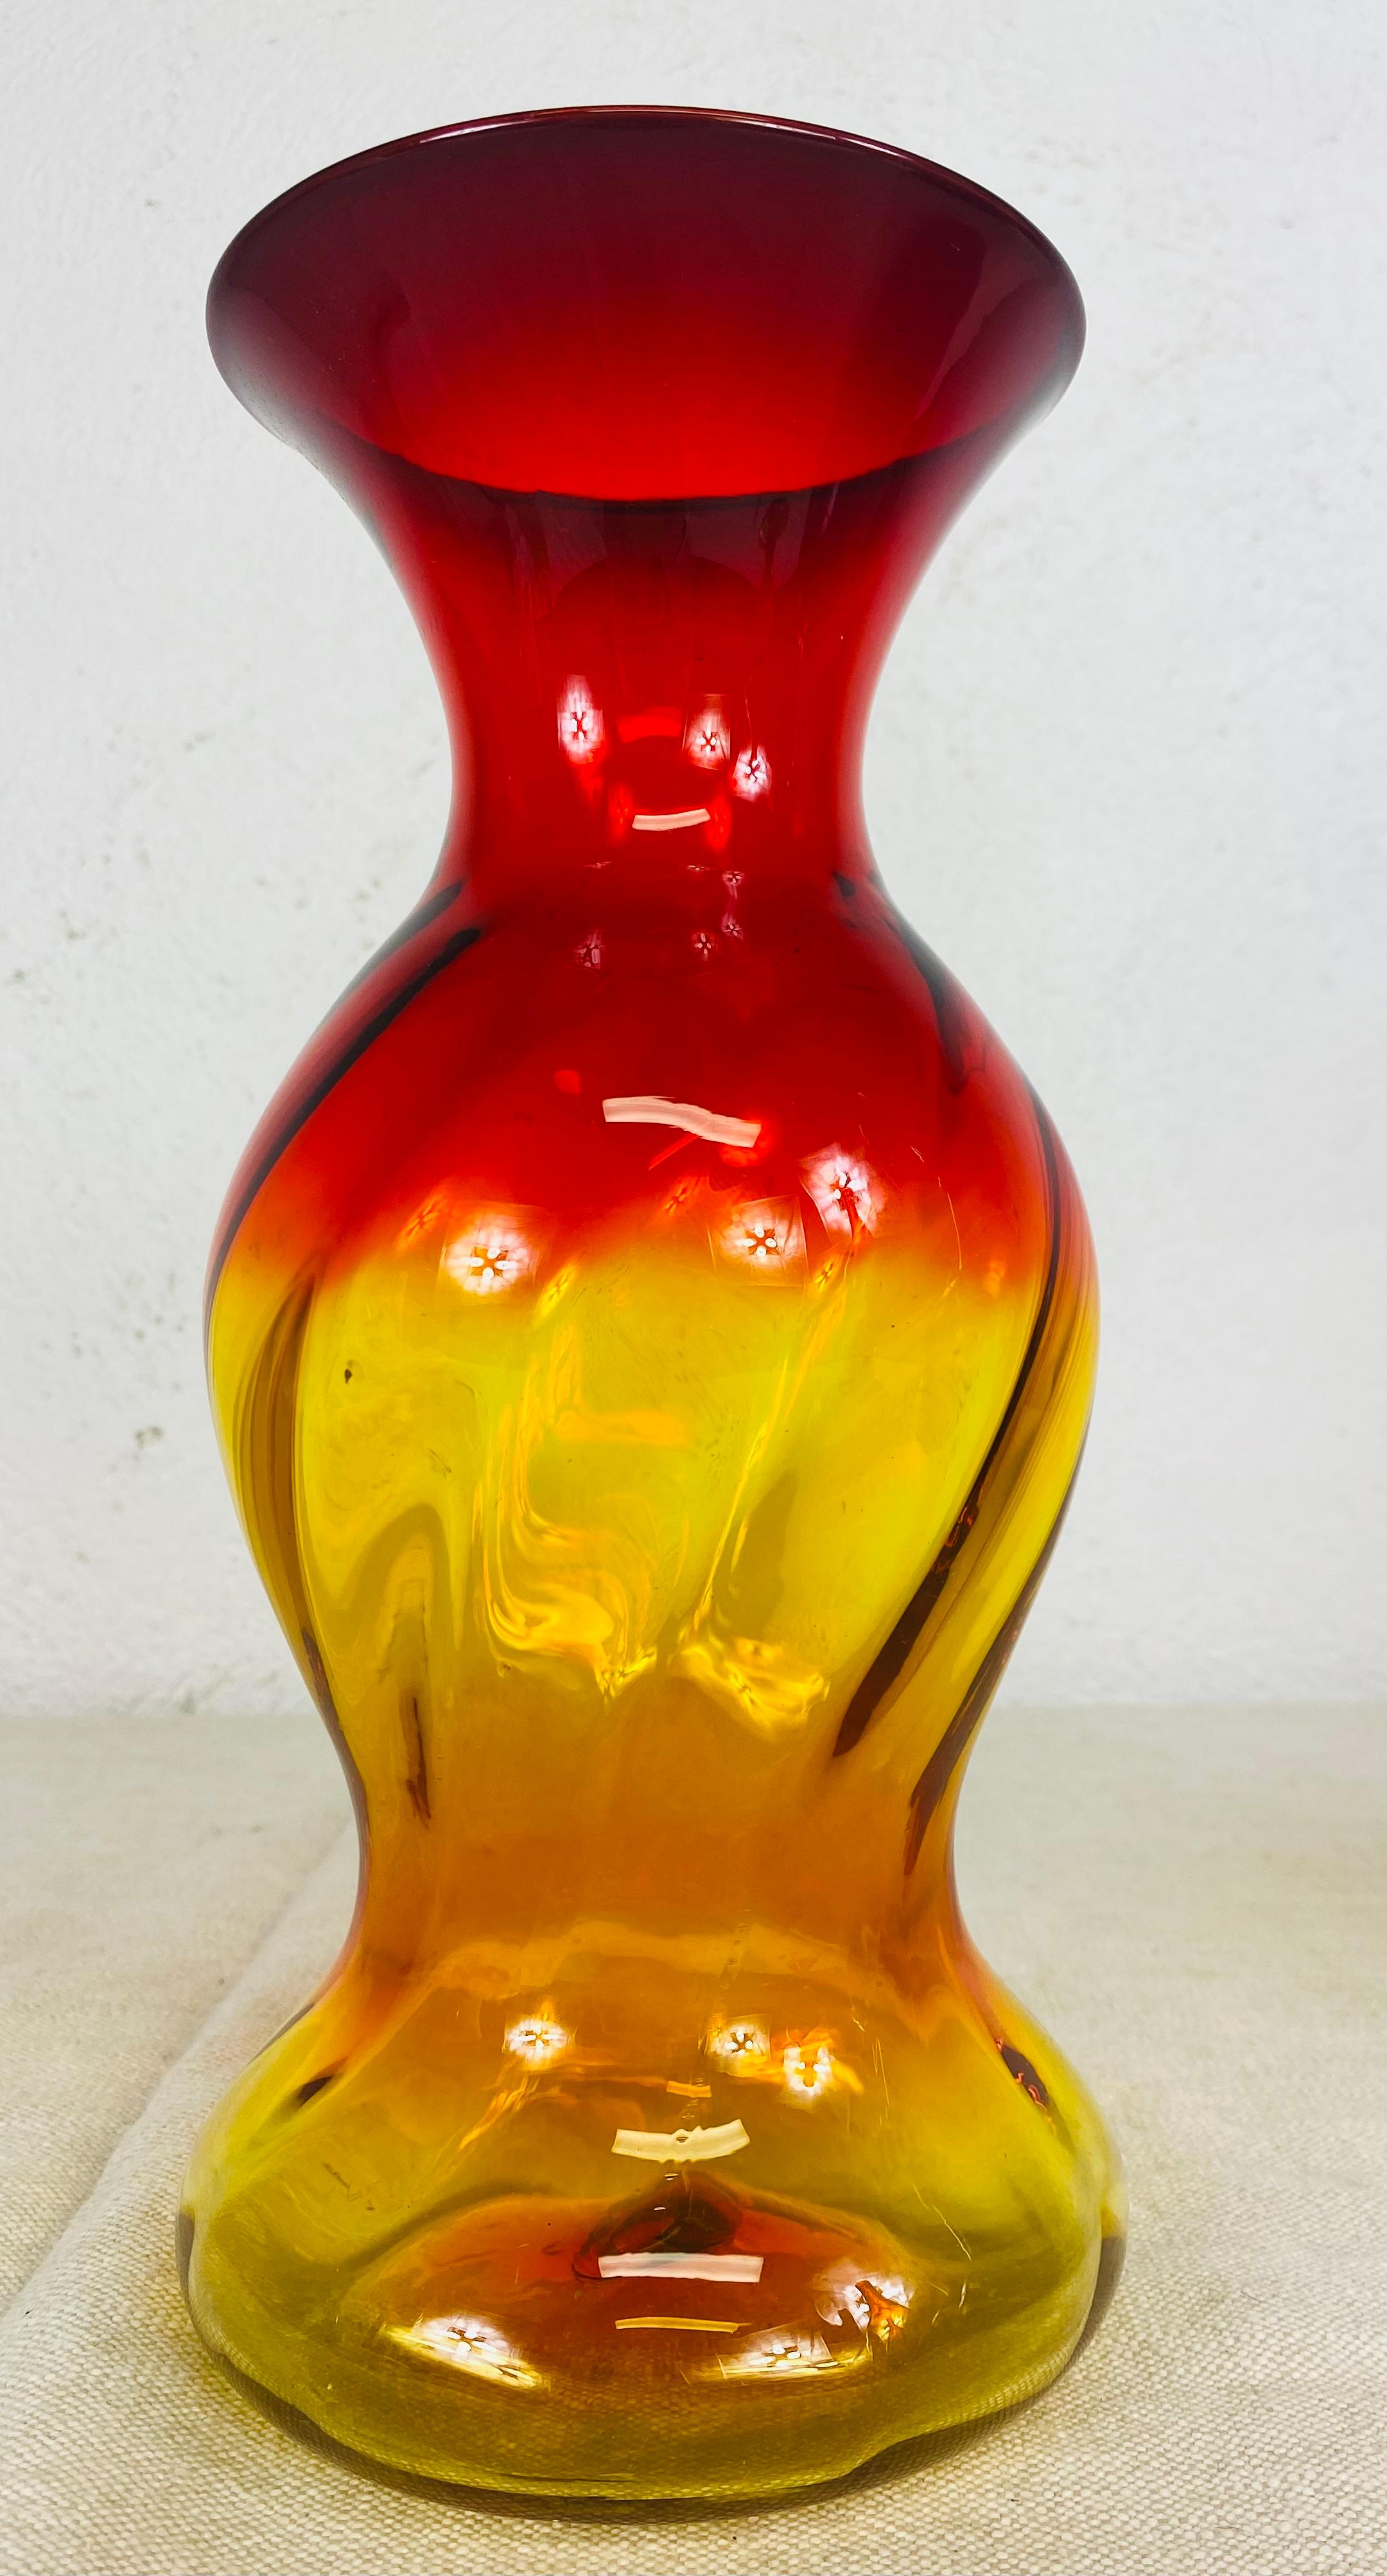 This is an original Blenko hand blown glass with identifying pontil underneath, circa 1965 by Wayne Husted; ambarina with orange highlights. The other glass items shown are for display only and can be purchased separately if you are interested and